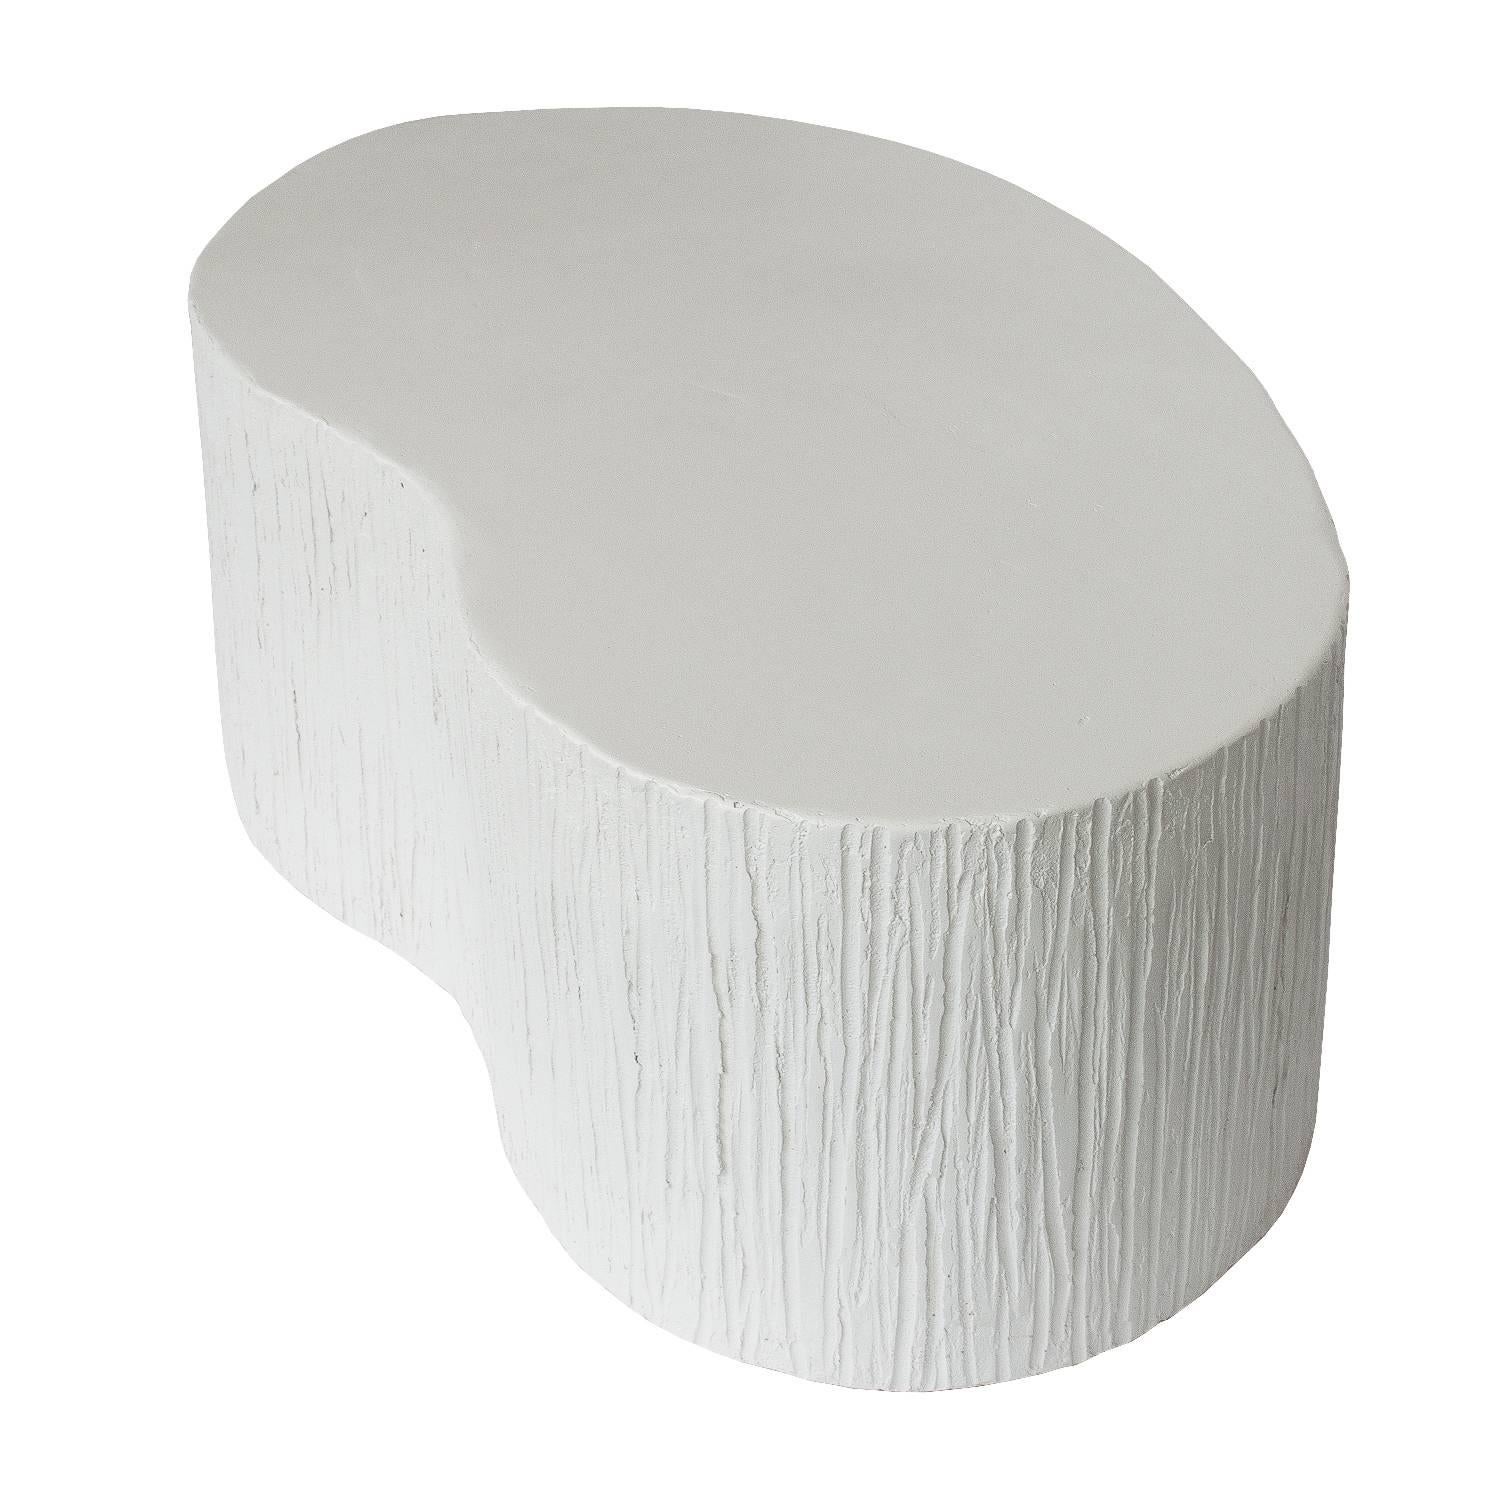 textured side table